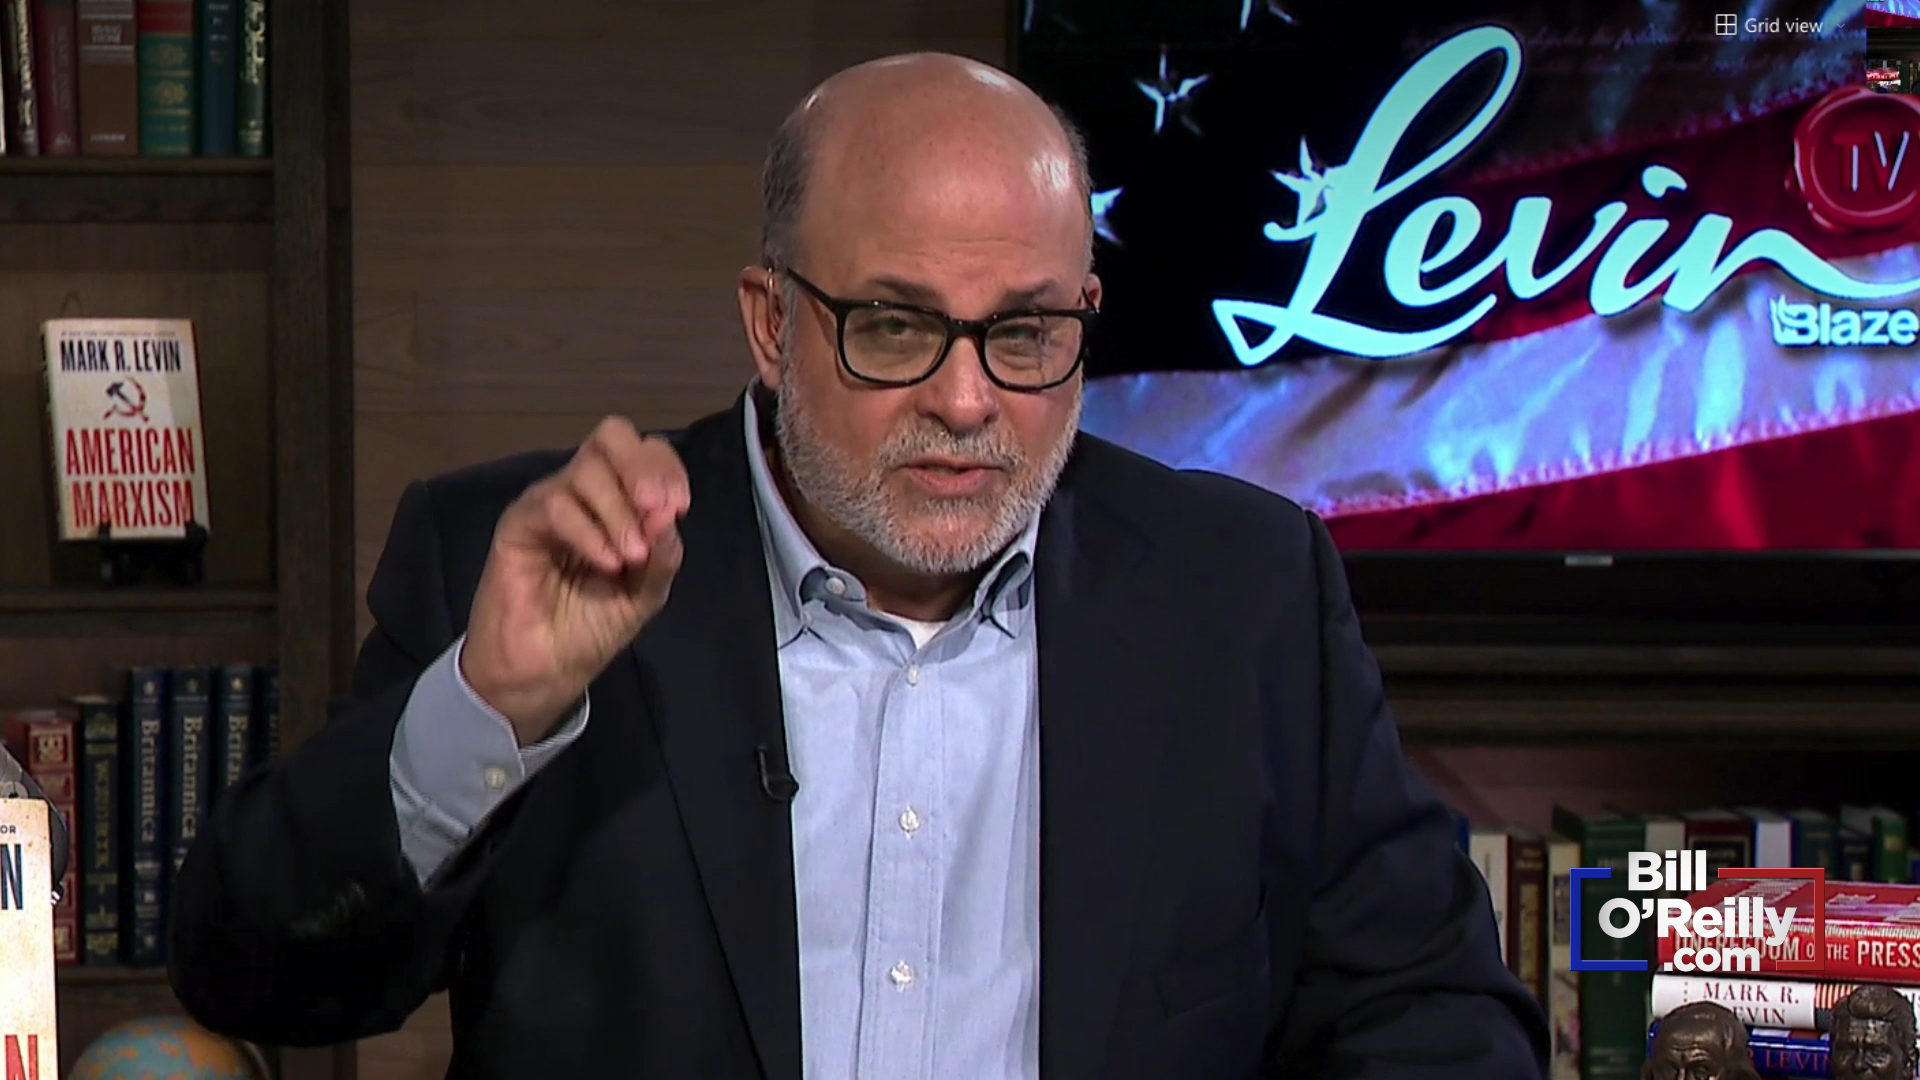 Listen: O'Reilly & Mark Levin discuss 'Killing the Killers'